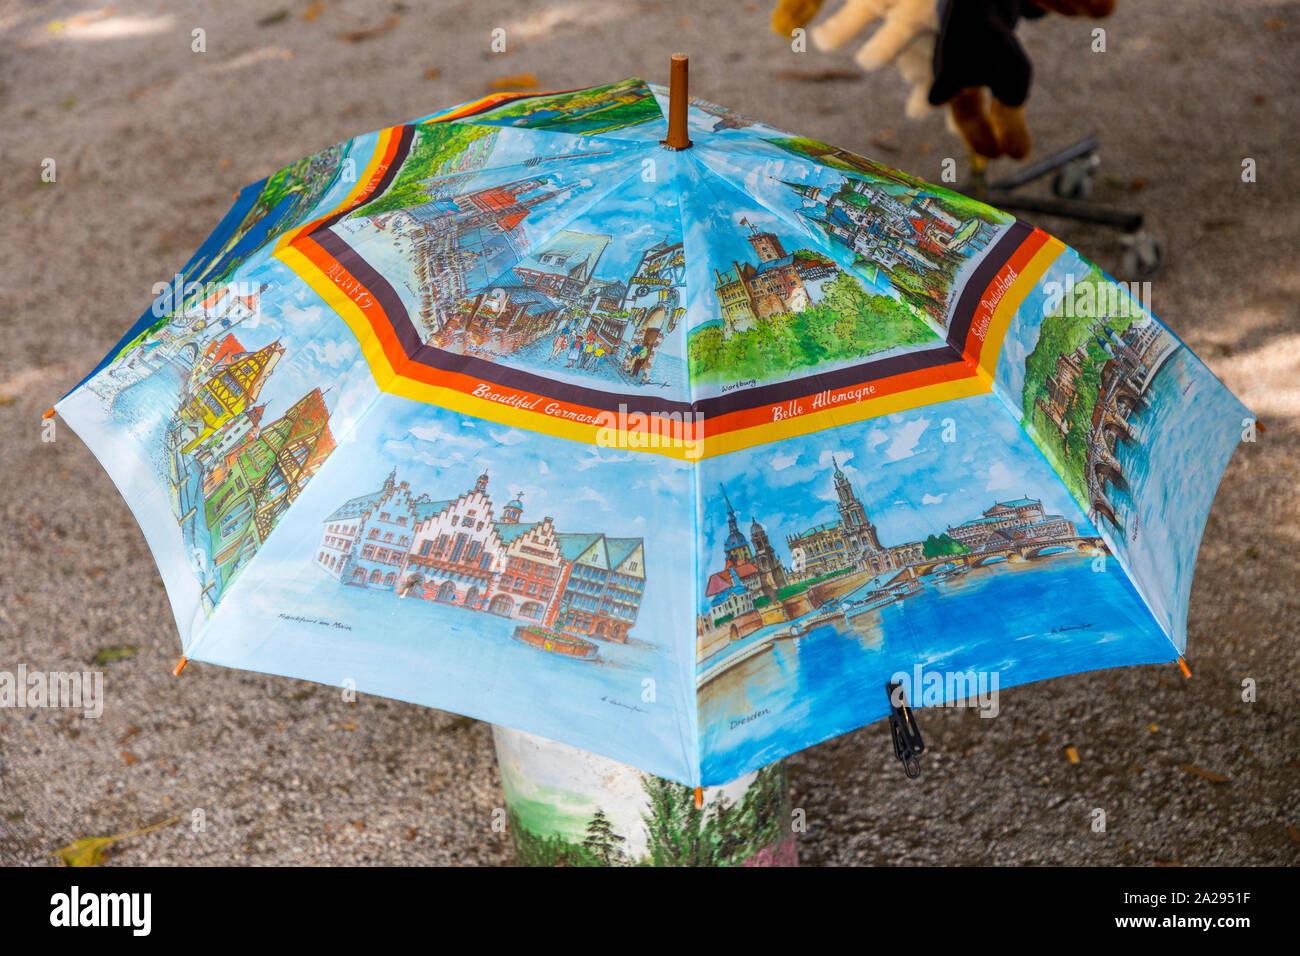 Koblenz, German corner, confluence of the Moselle and Rhine rivers, souvenir shop, kitschy Germany umbrella, Germany Stock Photo